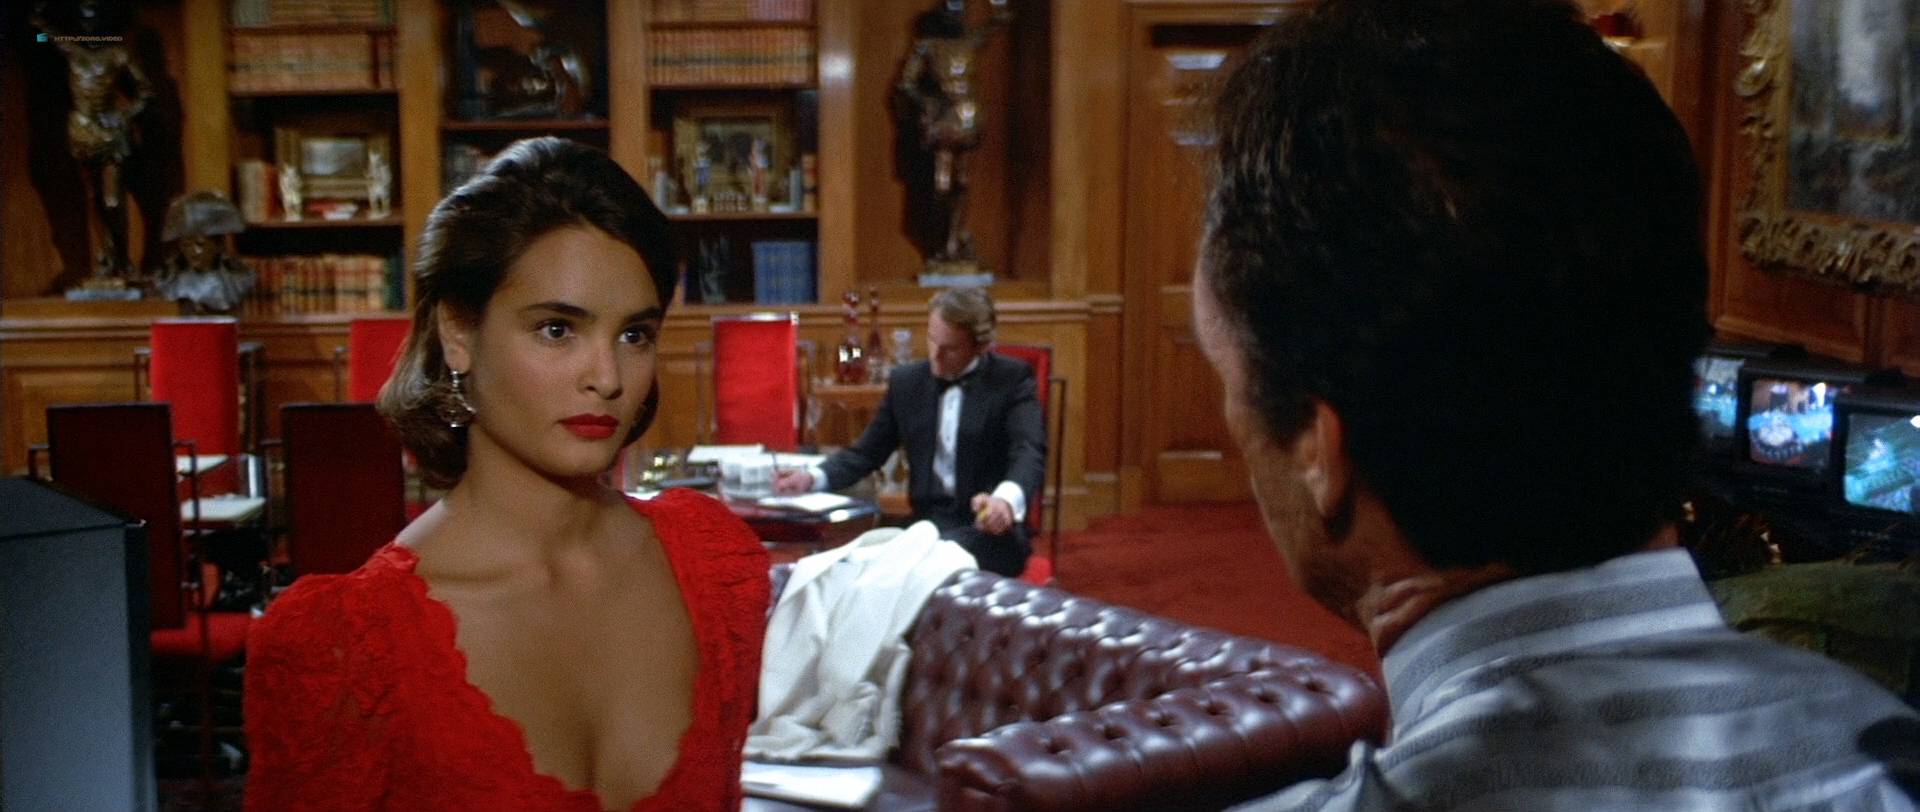 Carey Lowell hot leggy Talisa Soto hot and sexy - Licence to Kill (1989) HD 1080p BluRay (17)